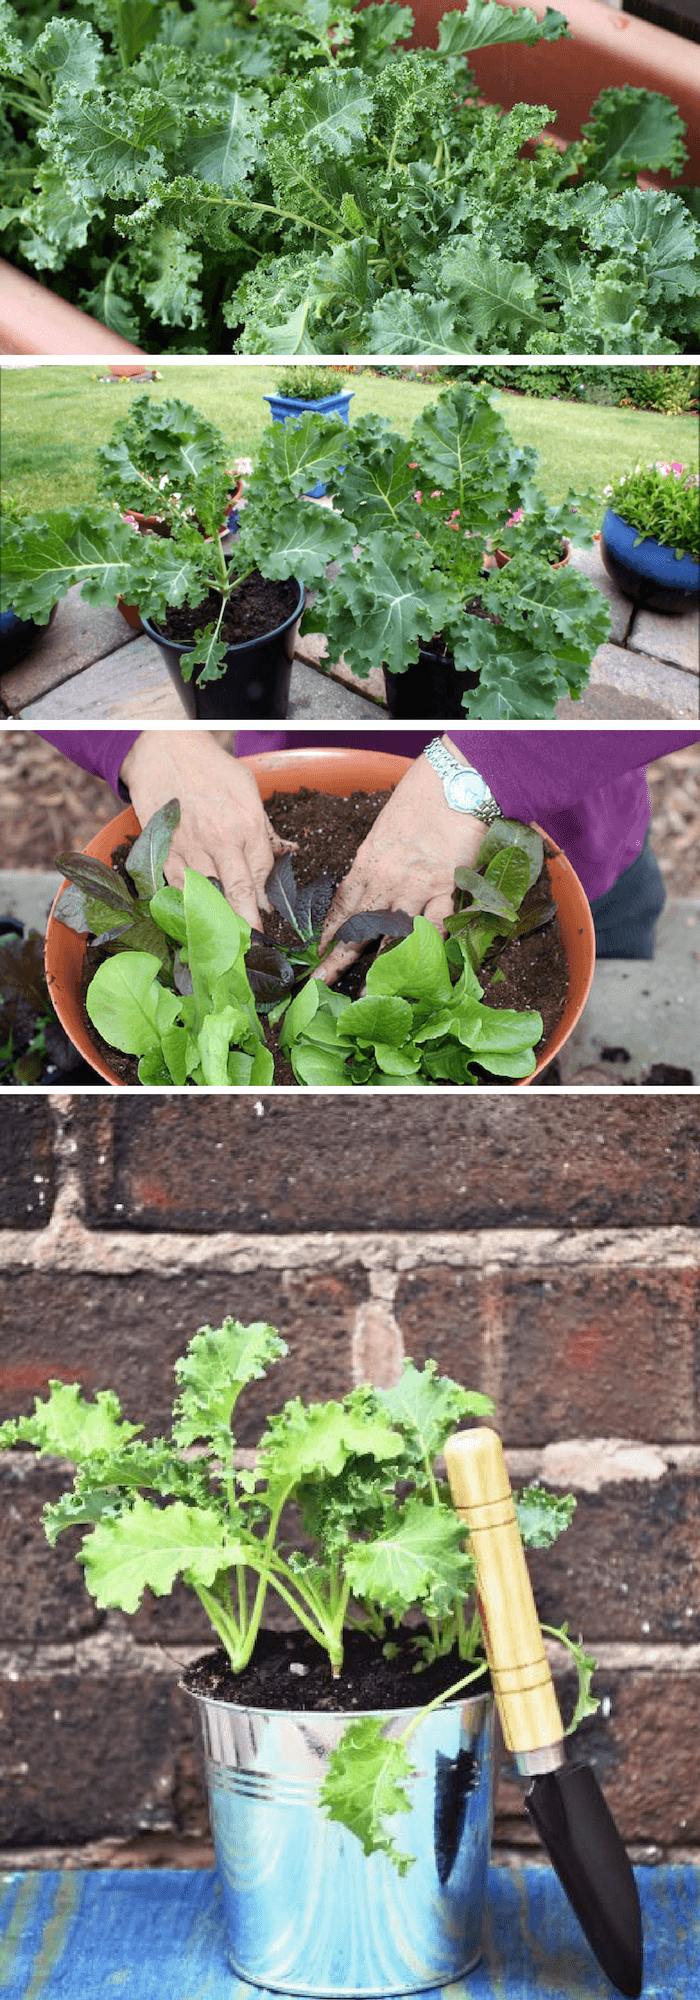 Growing Kale in containers